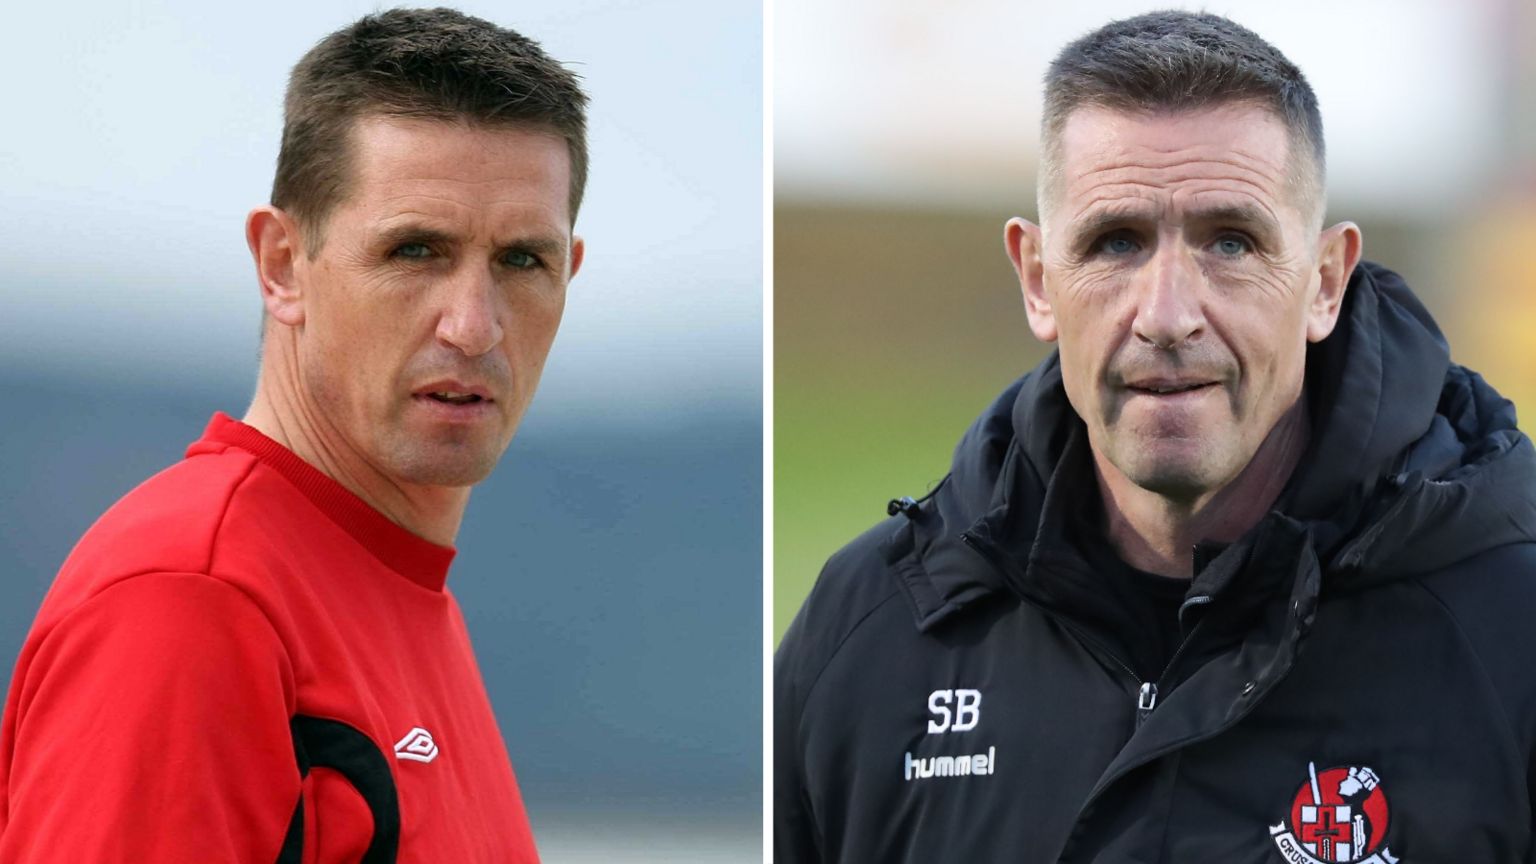 Stephen Baxter in 2007 and then in 2023